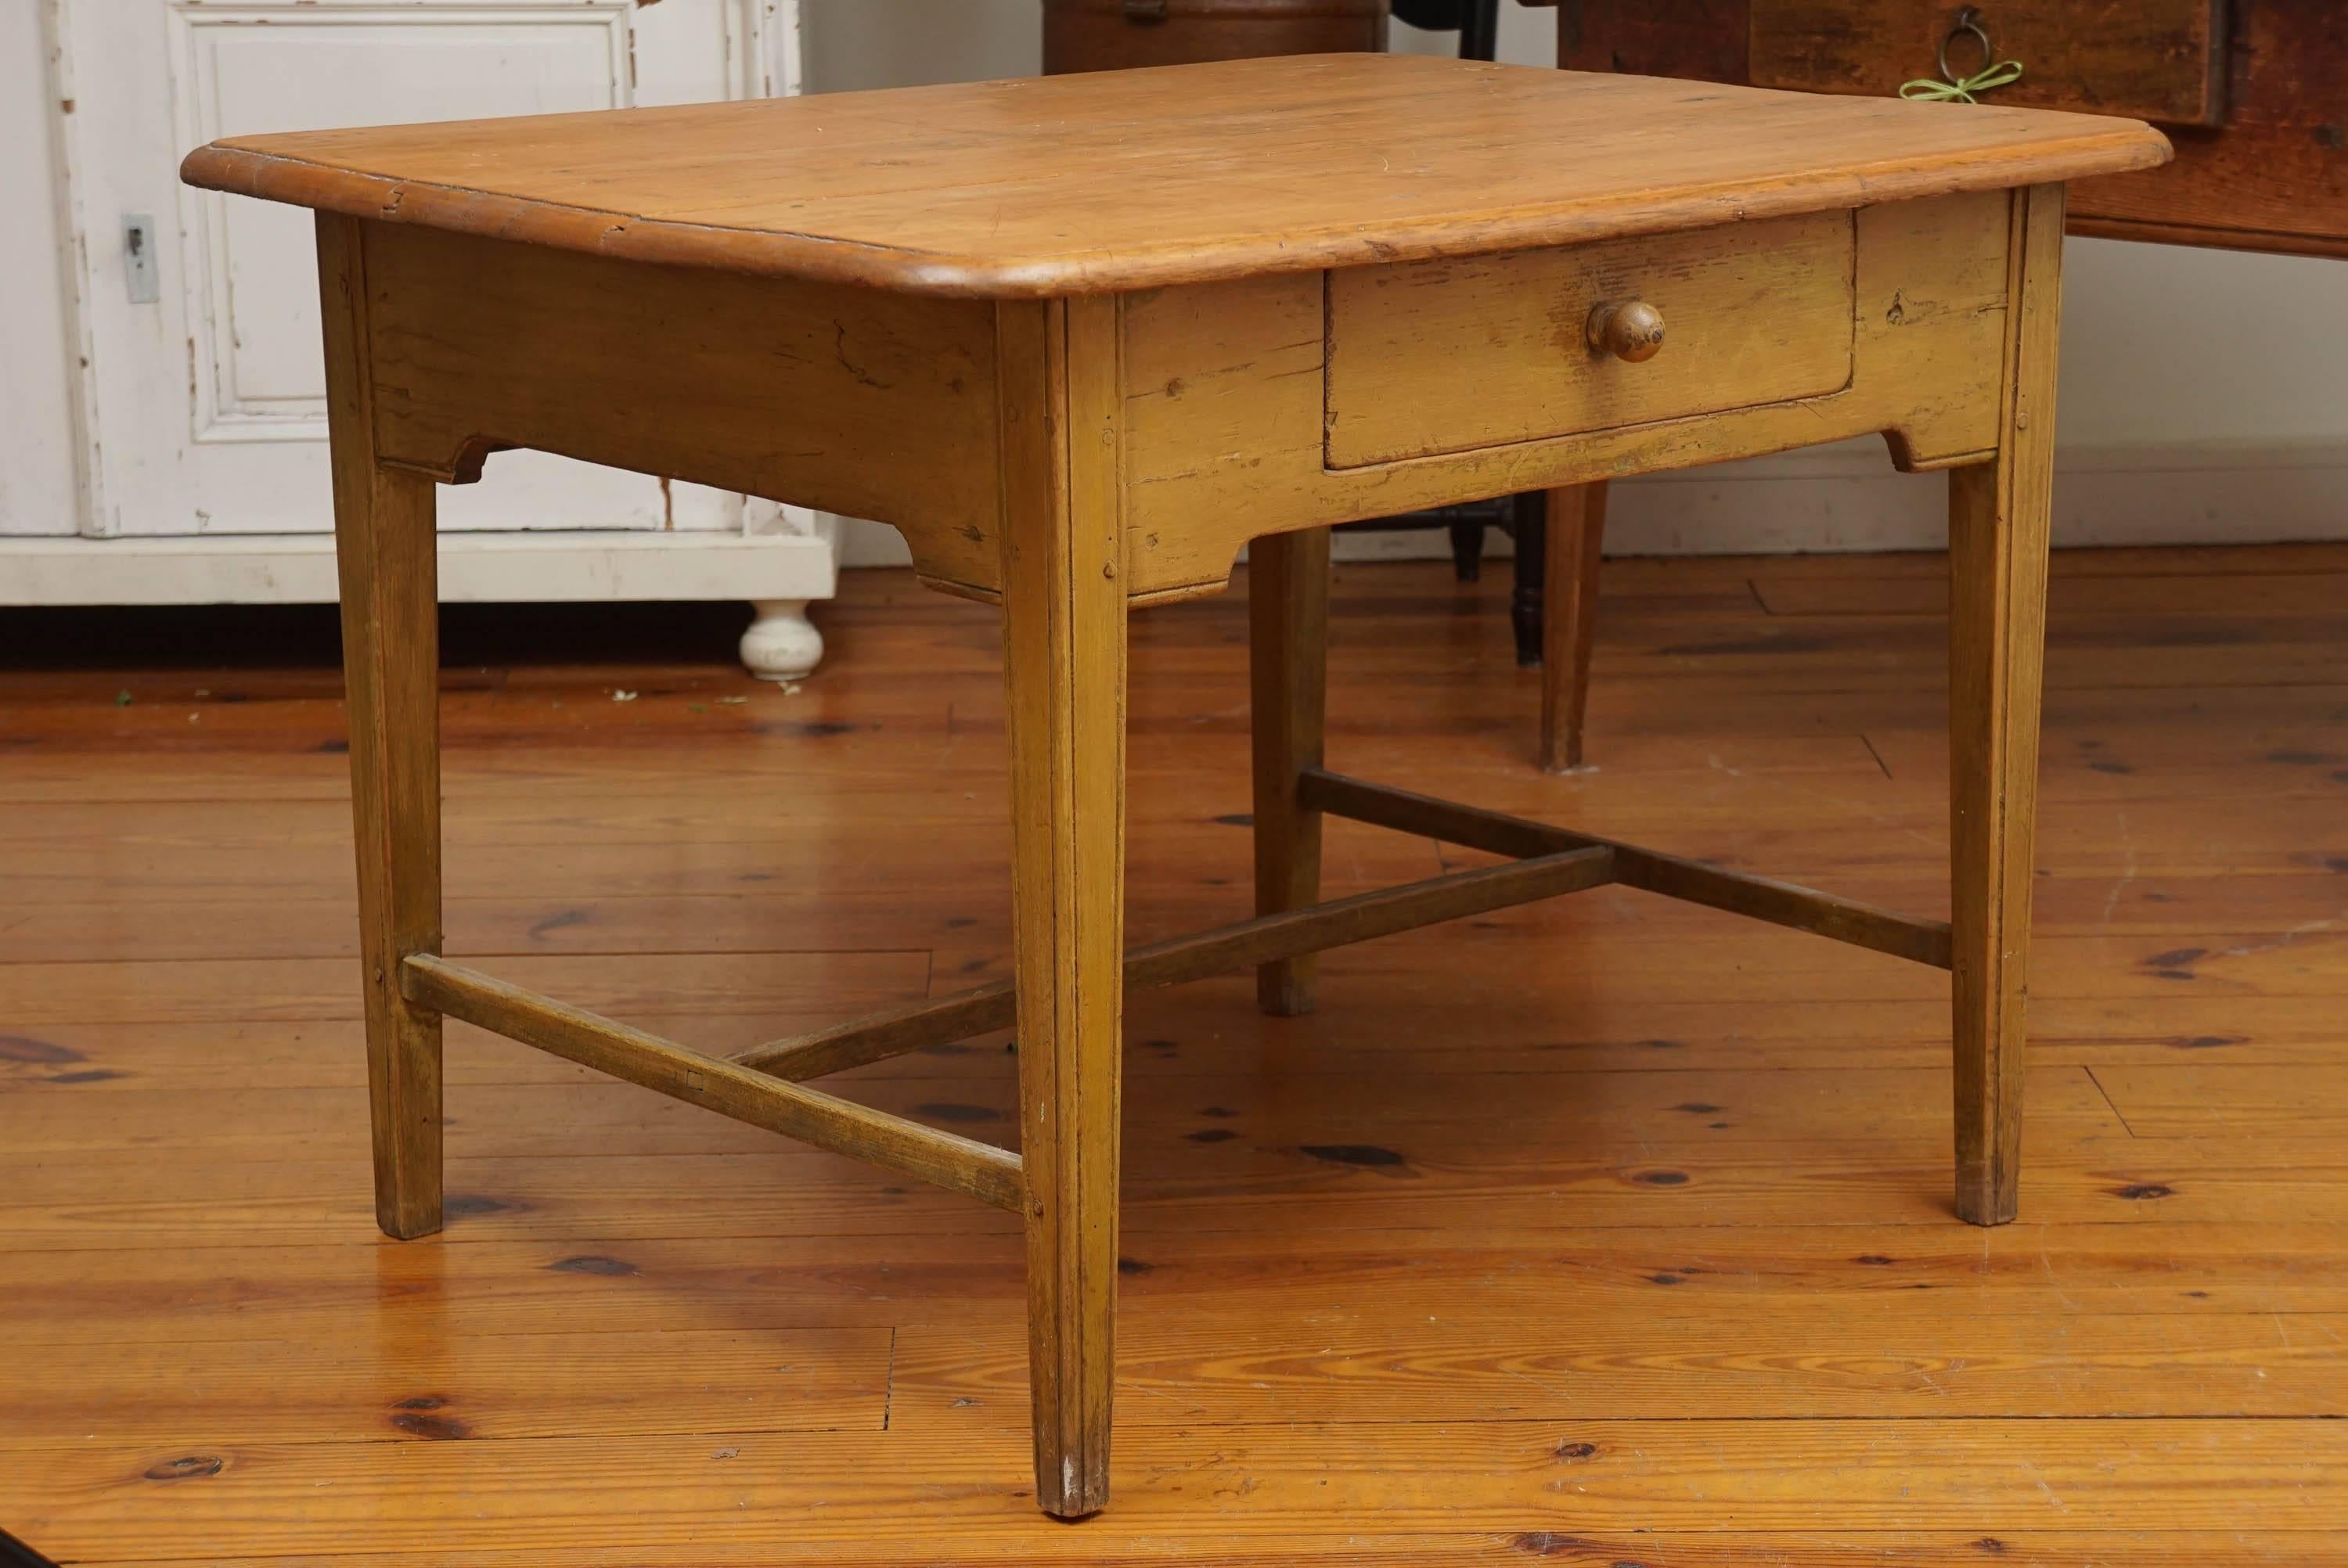 This Canadian farm table from, circa 1870 has a scrubbed pine top of three wide boards and original yellow painted base. The base has one good size drawer, a 